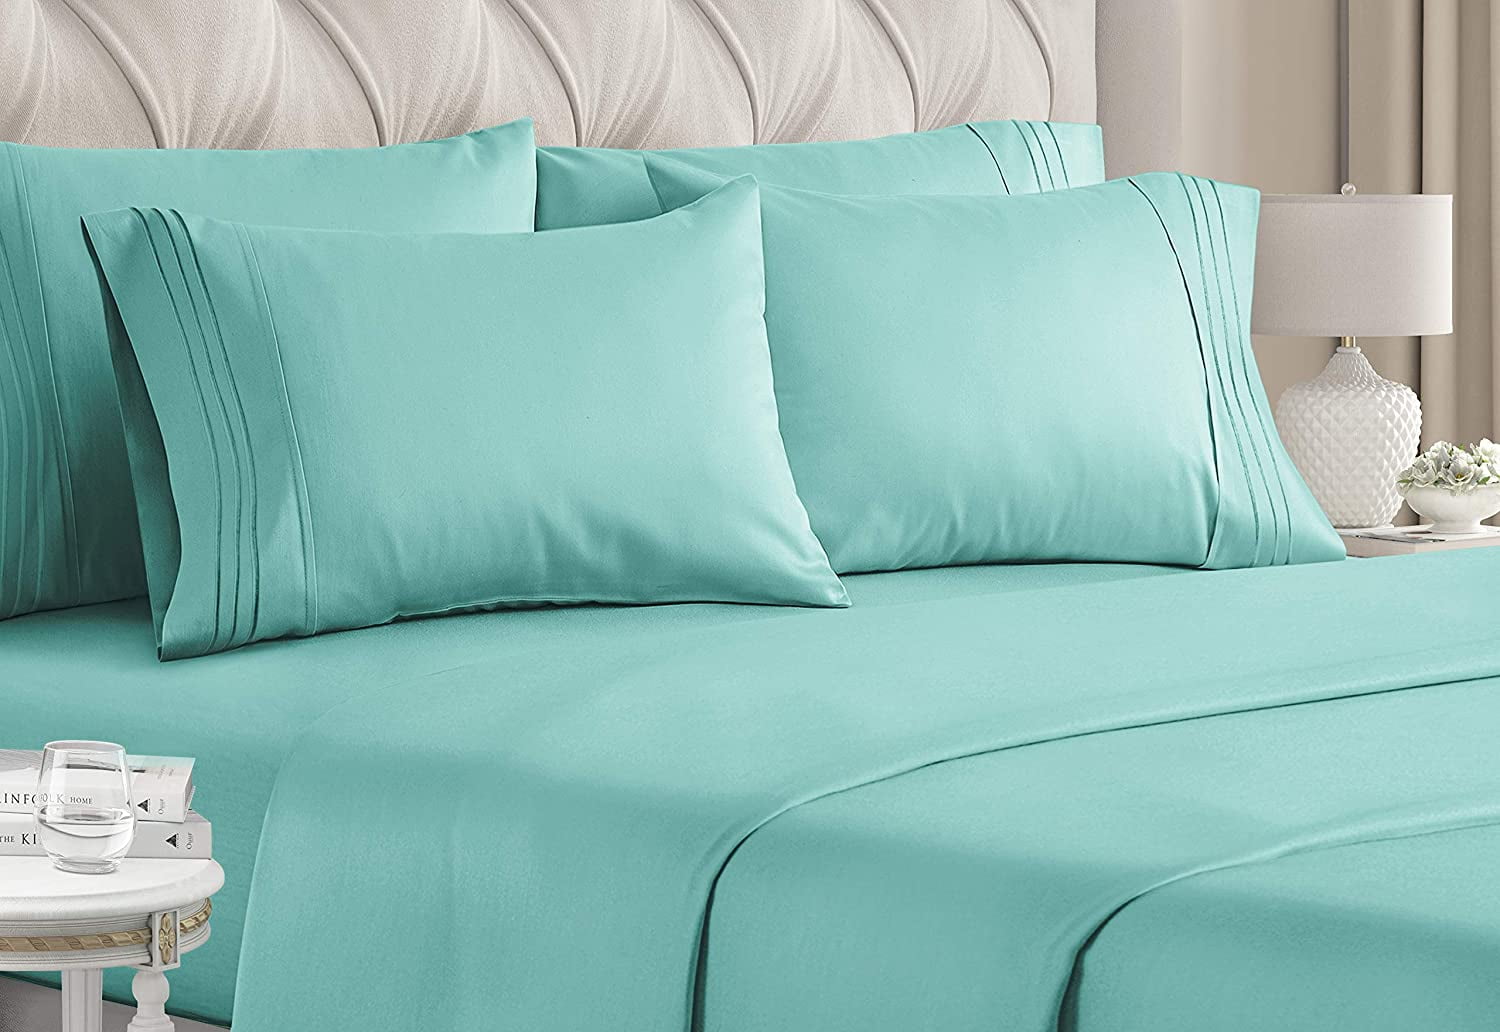 Details about   Cushy Bedding Fitted Sheet+Pillow Case Ultra Wall Depth AU Double Size All Solid 